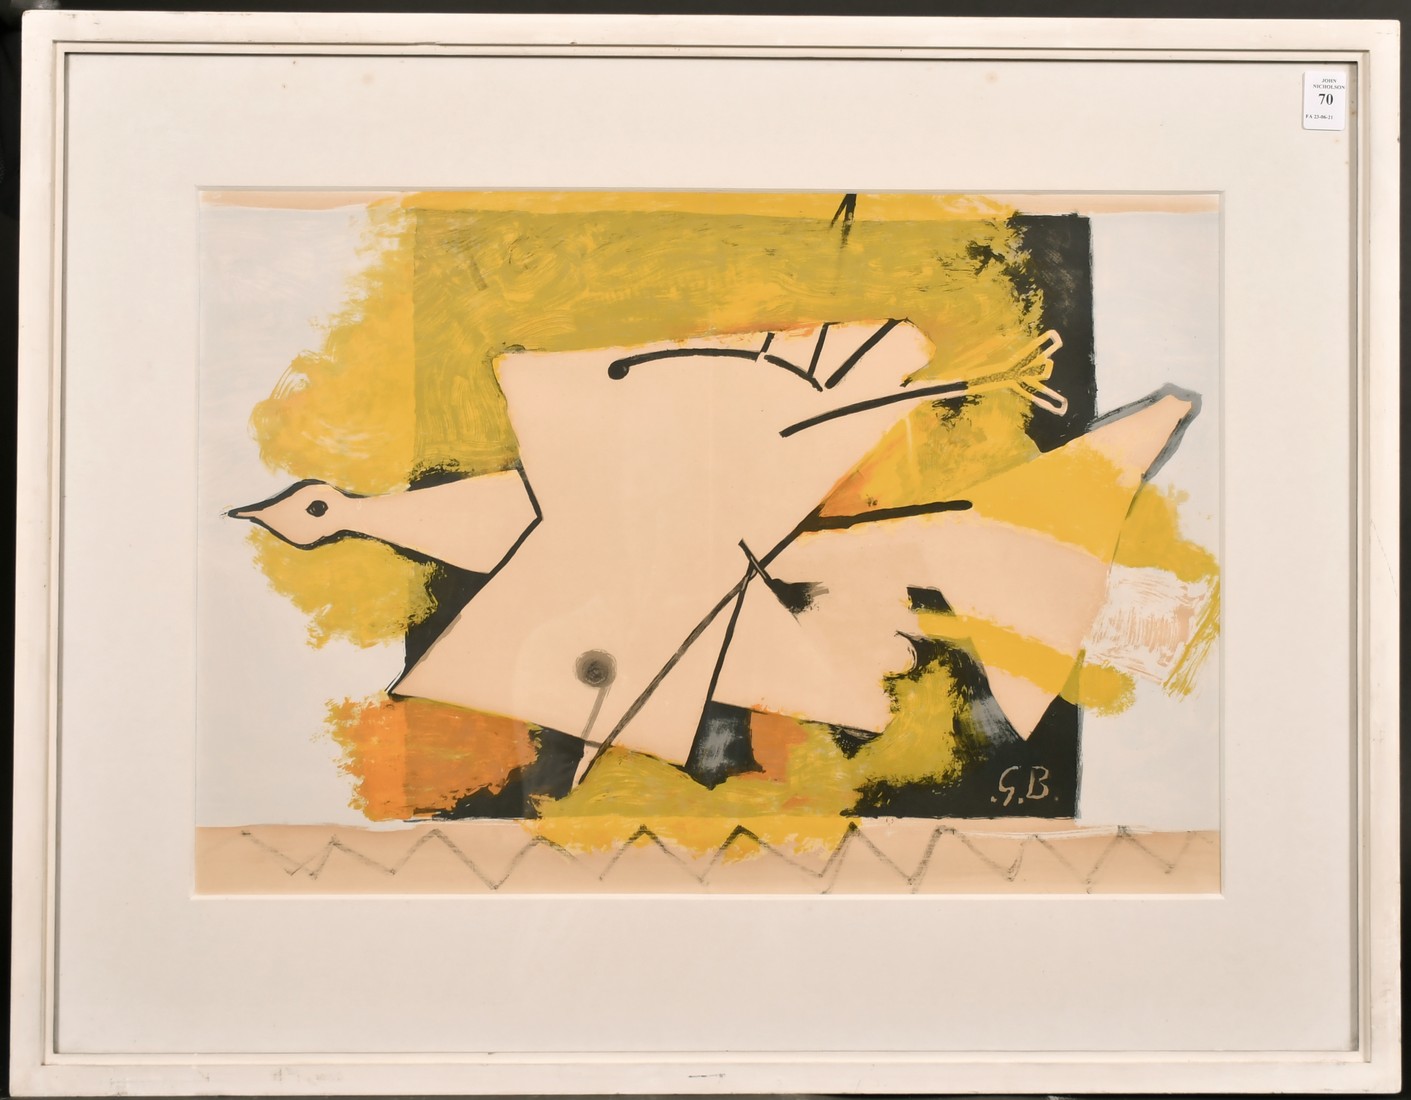 After George Braque, A bird on a yellow background, double page lithograph, 11" x 21.5". - Image 2 of 3